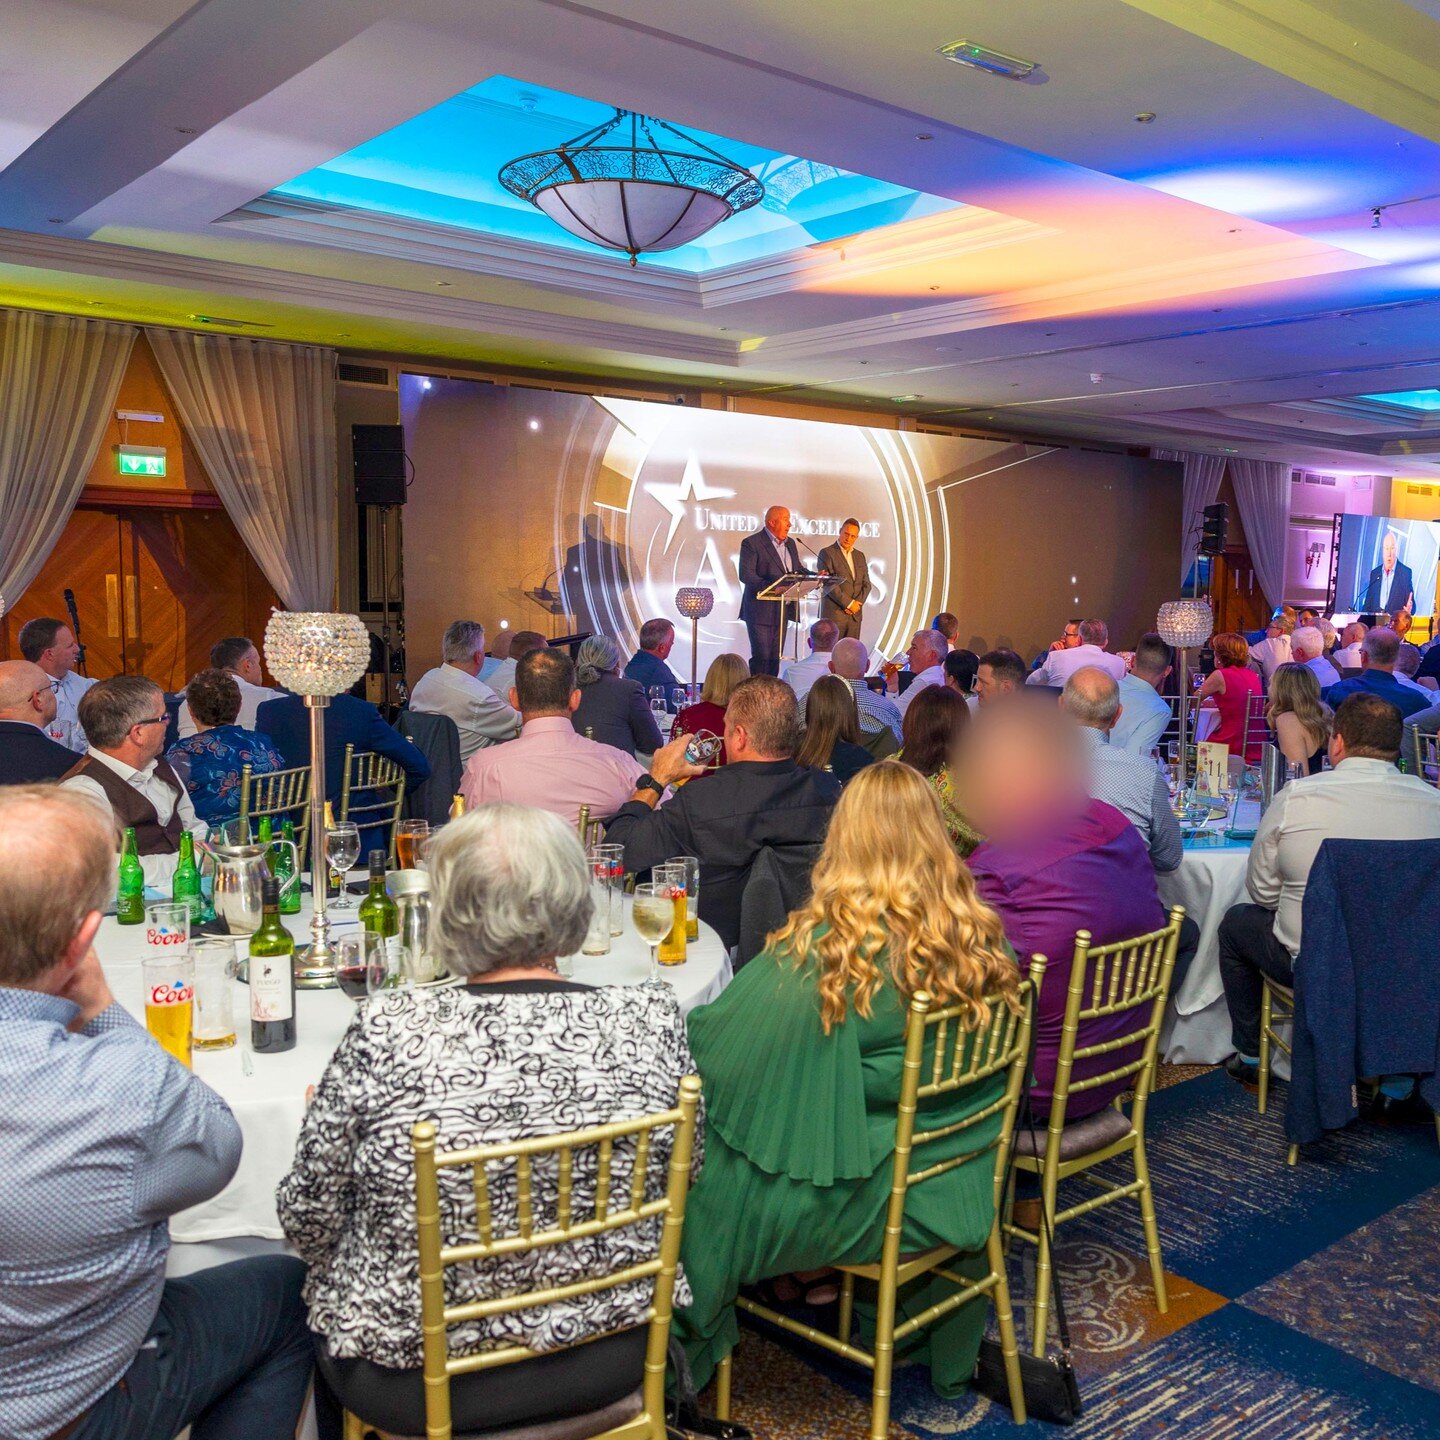 Hardware and builders merchant stores from around the country were recently honoured for achieving exceptional standards in retailing at the &lsquo;United in Excellence Awards&rsquo; ceremony, hosted by Comedian, Mario Rosenstock at Mount Wolseley Ho